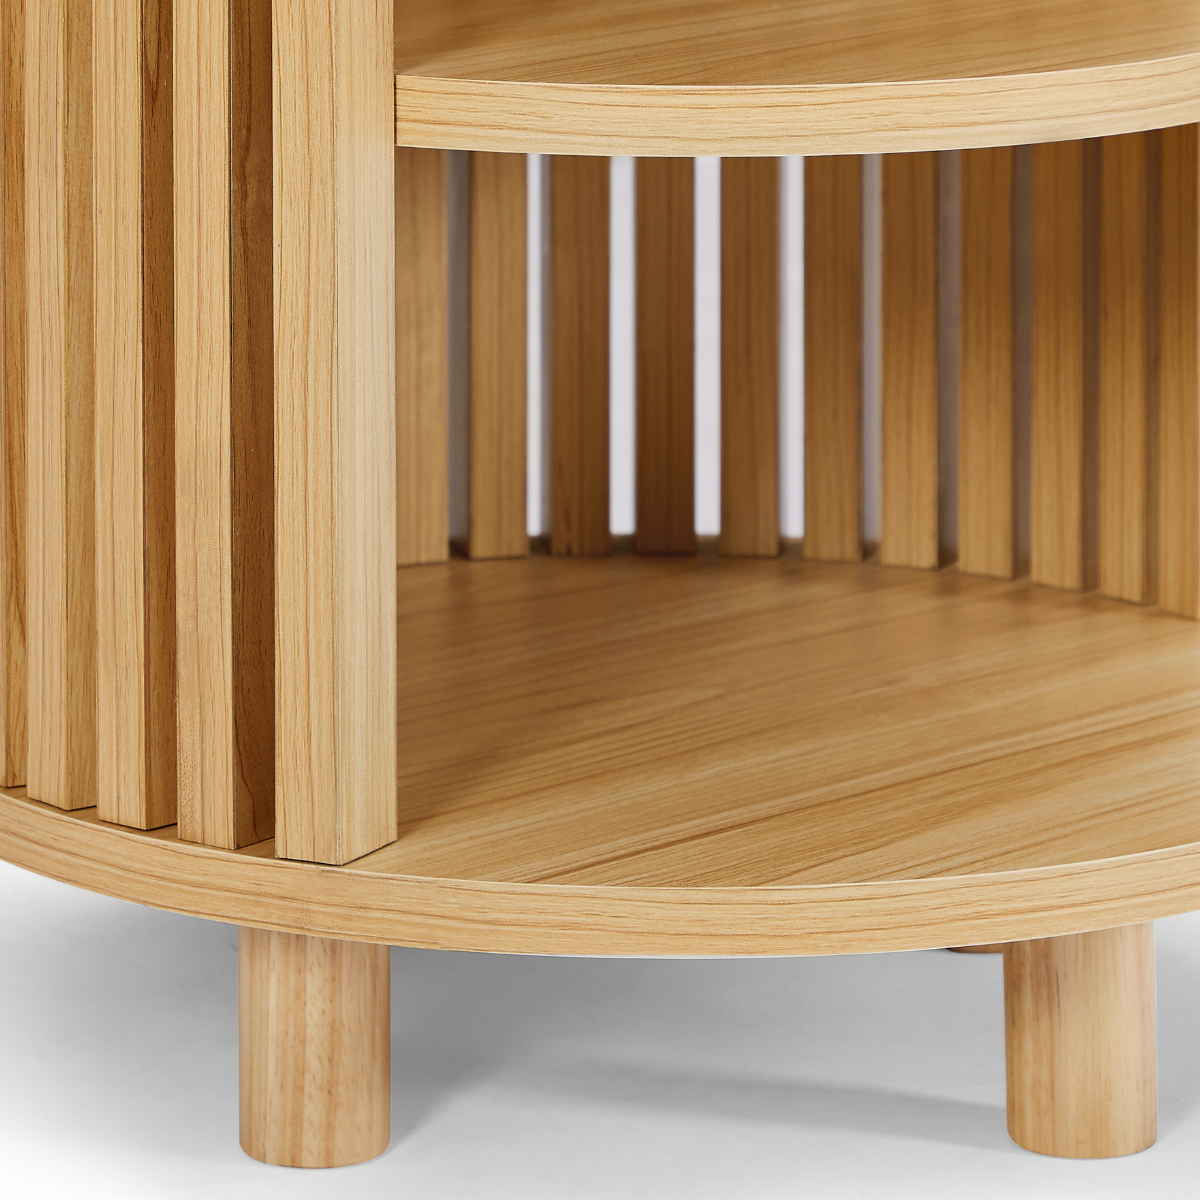 Henley Round Wooden Bedside Table - image7